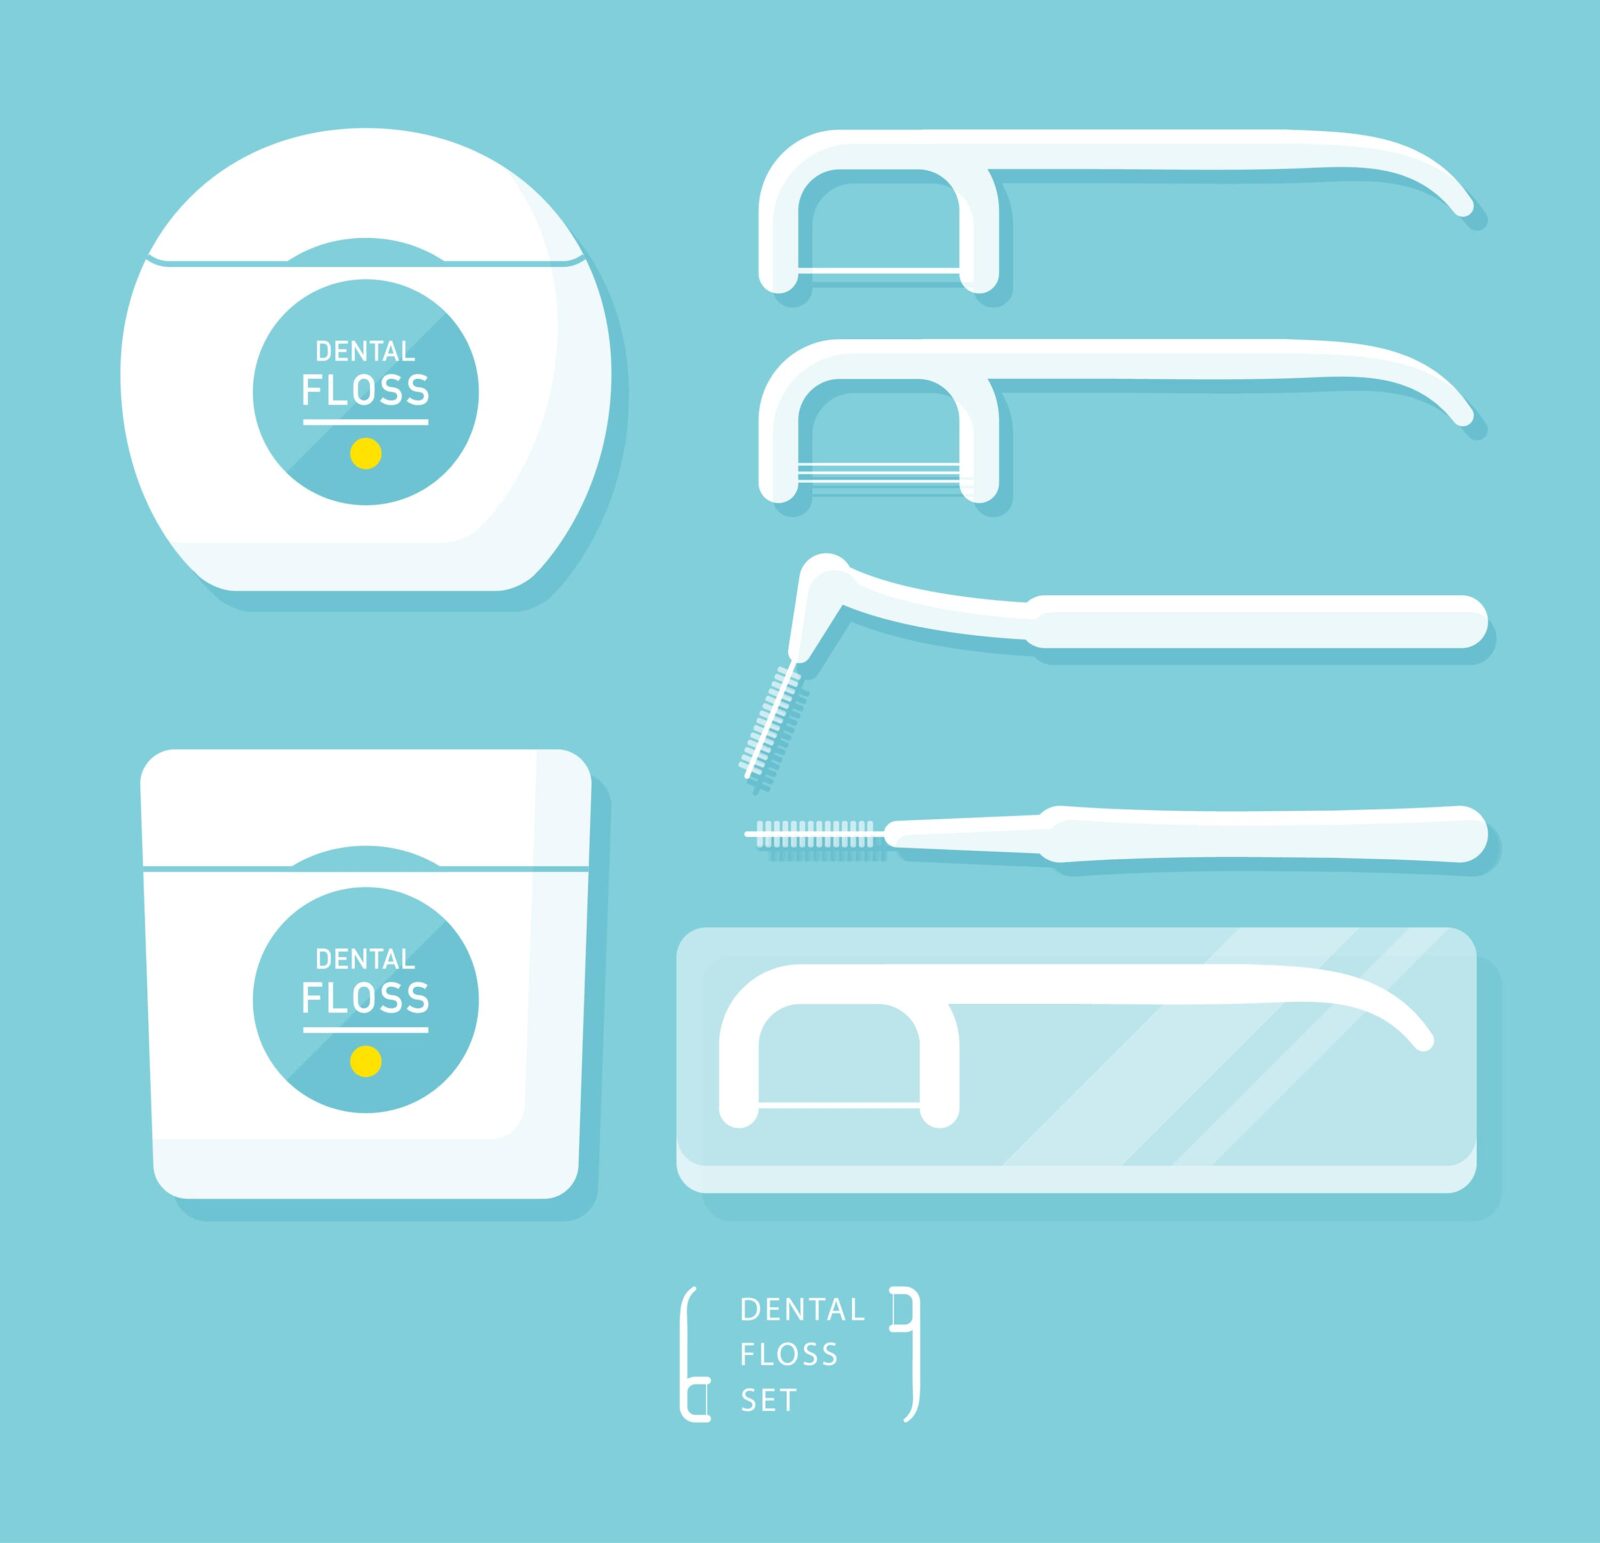 vector image showing various types of floss